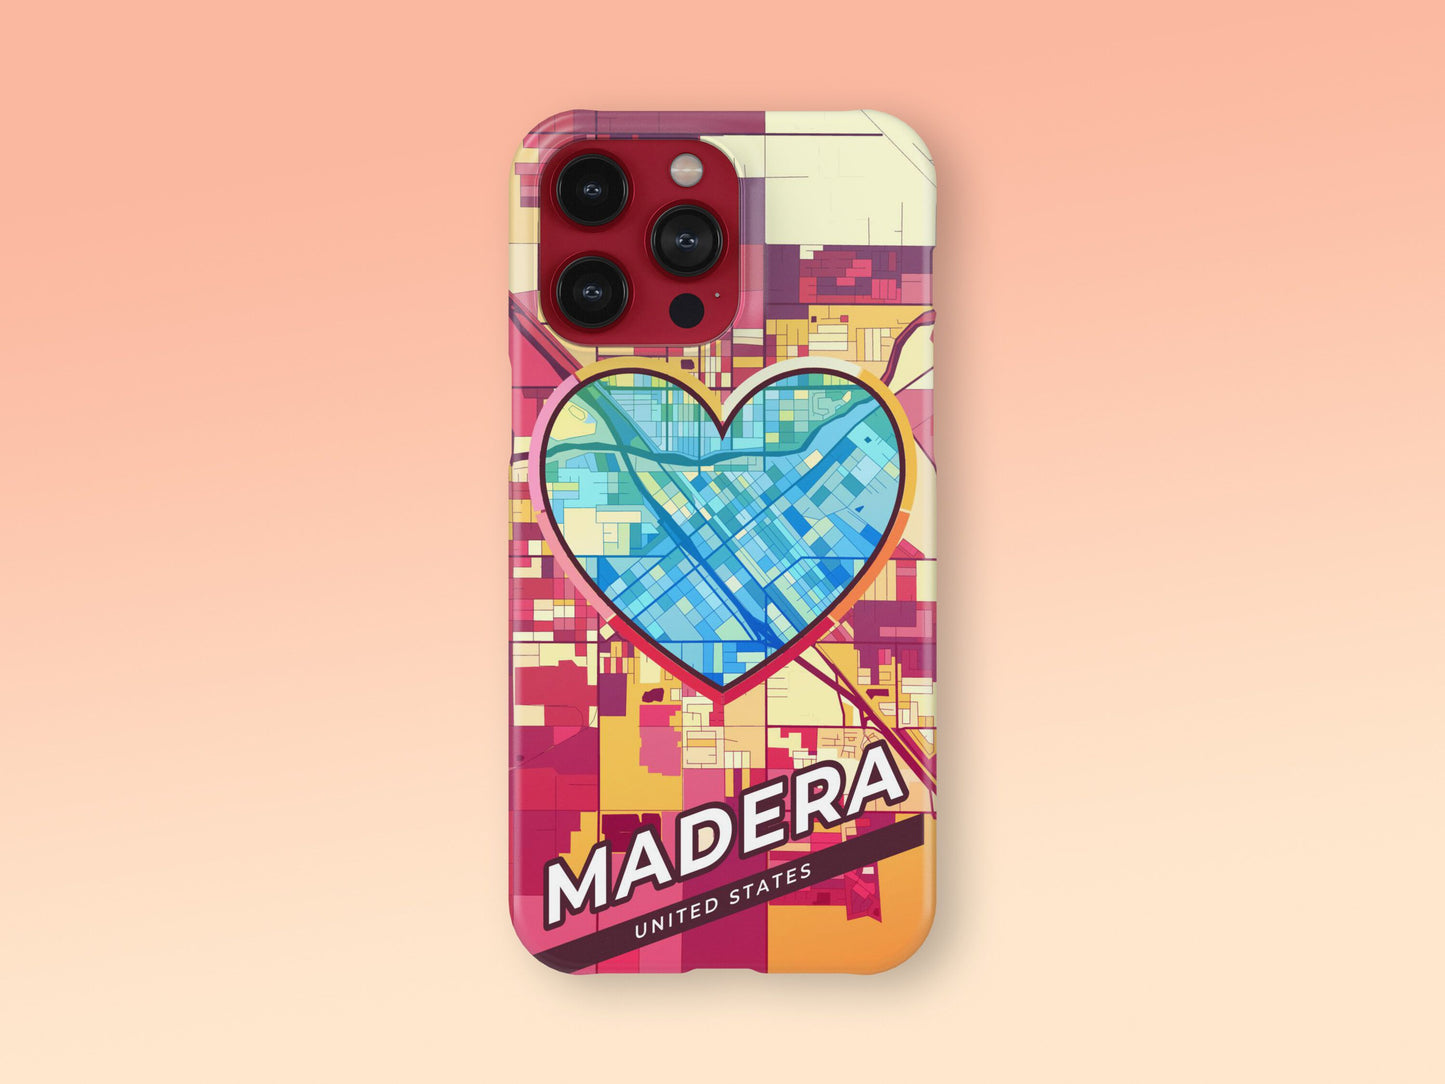 Madera California slim phone case with colorful icon. Birthday, wedding or housewarming gift. Couple match cases. 2